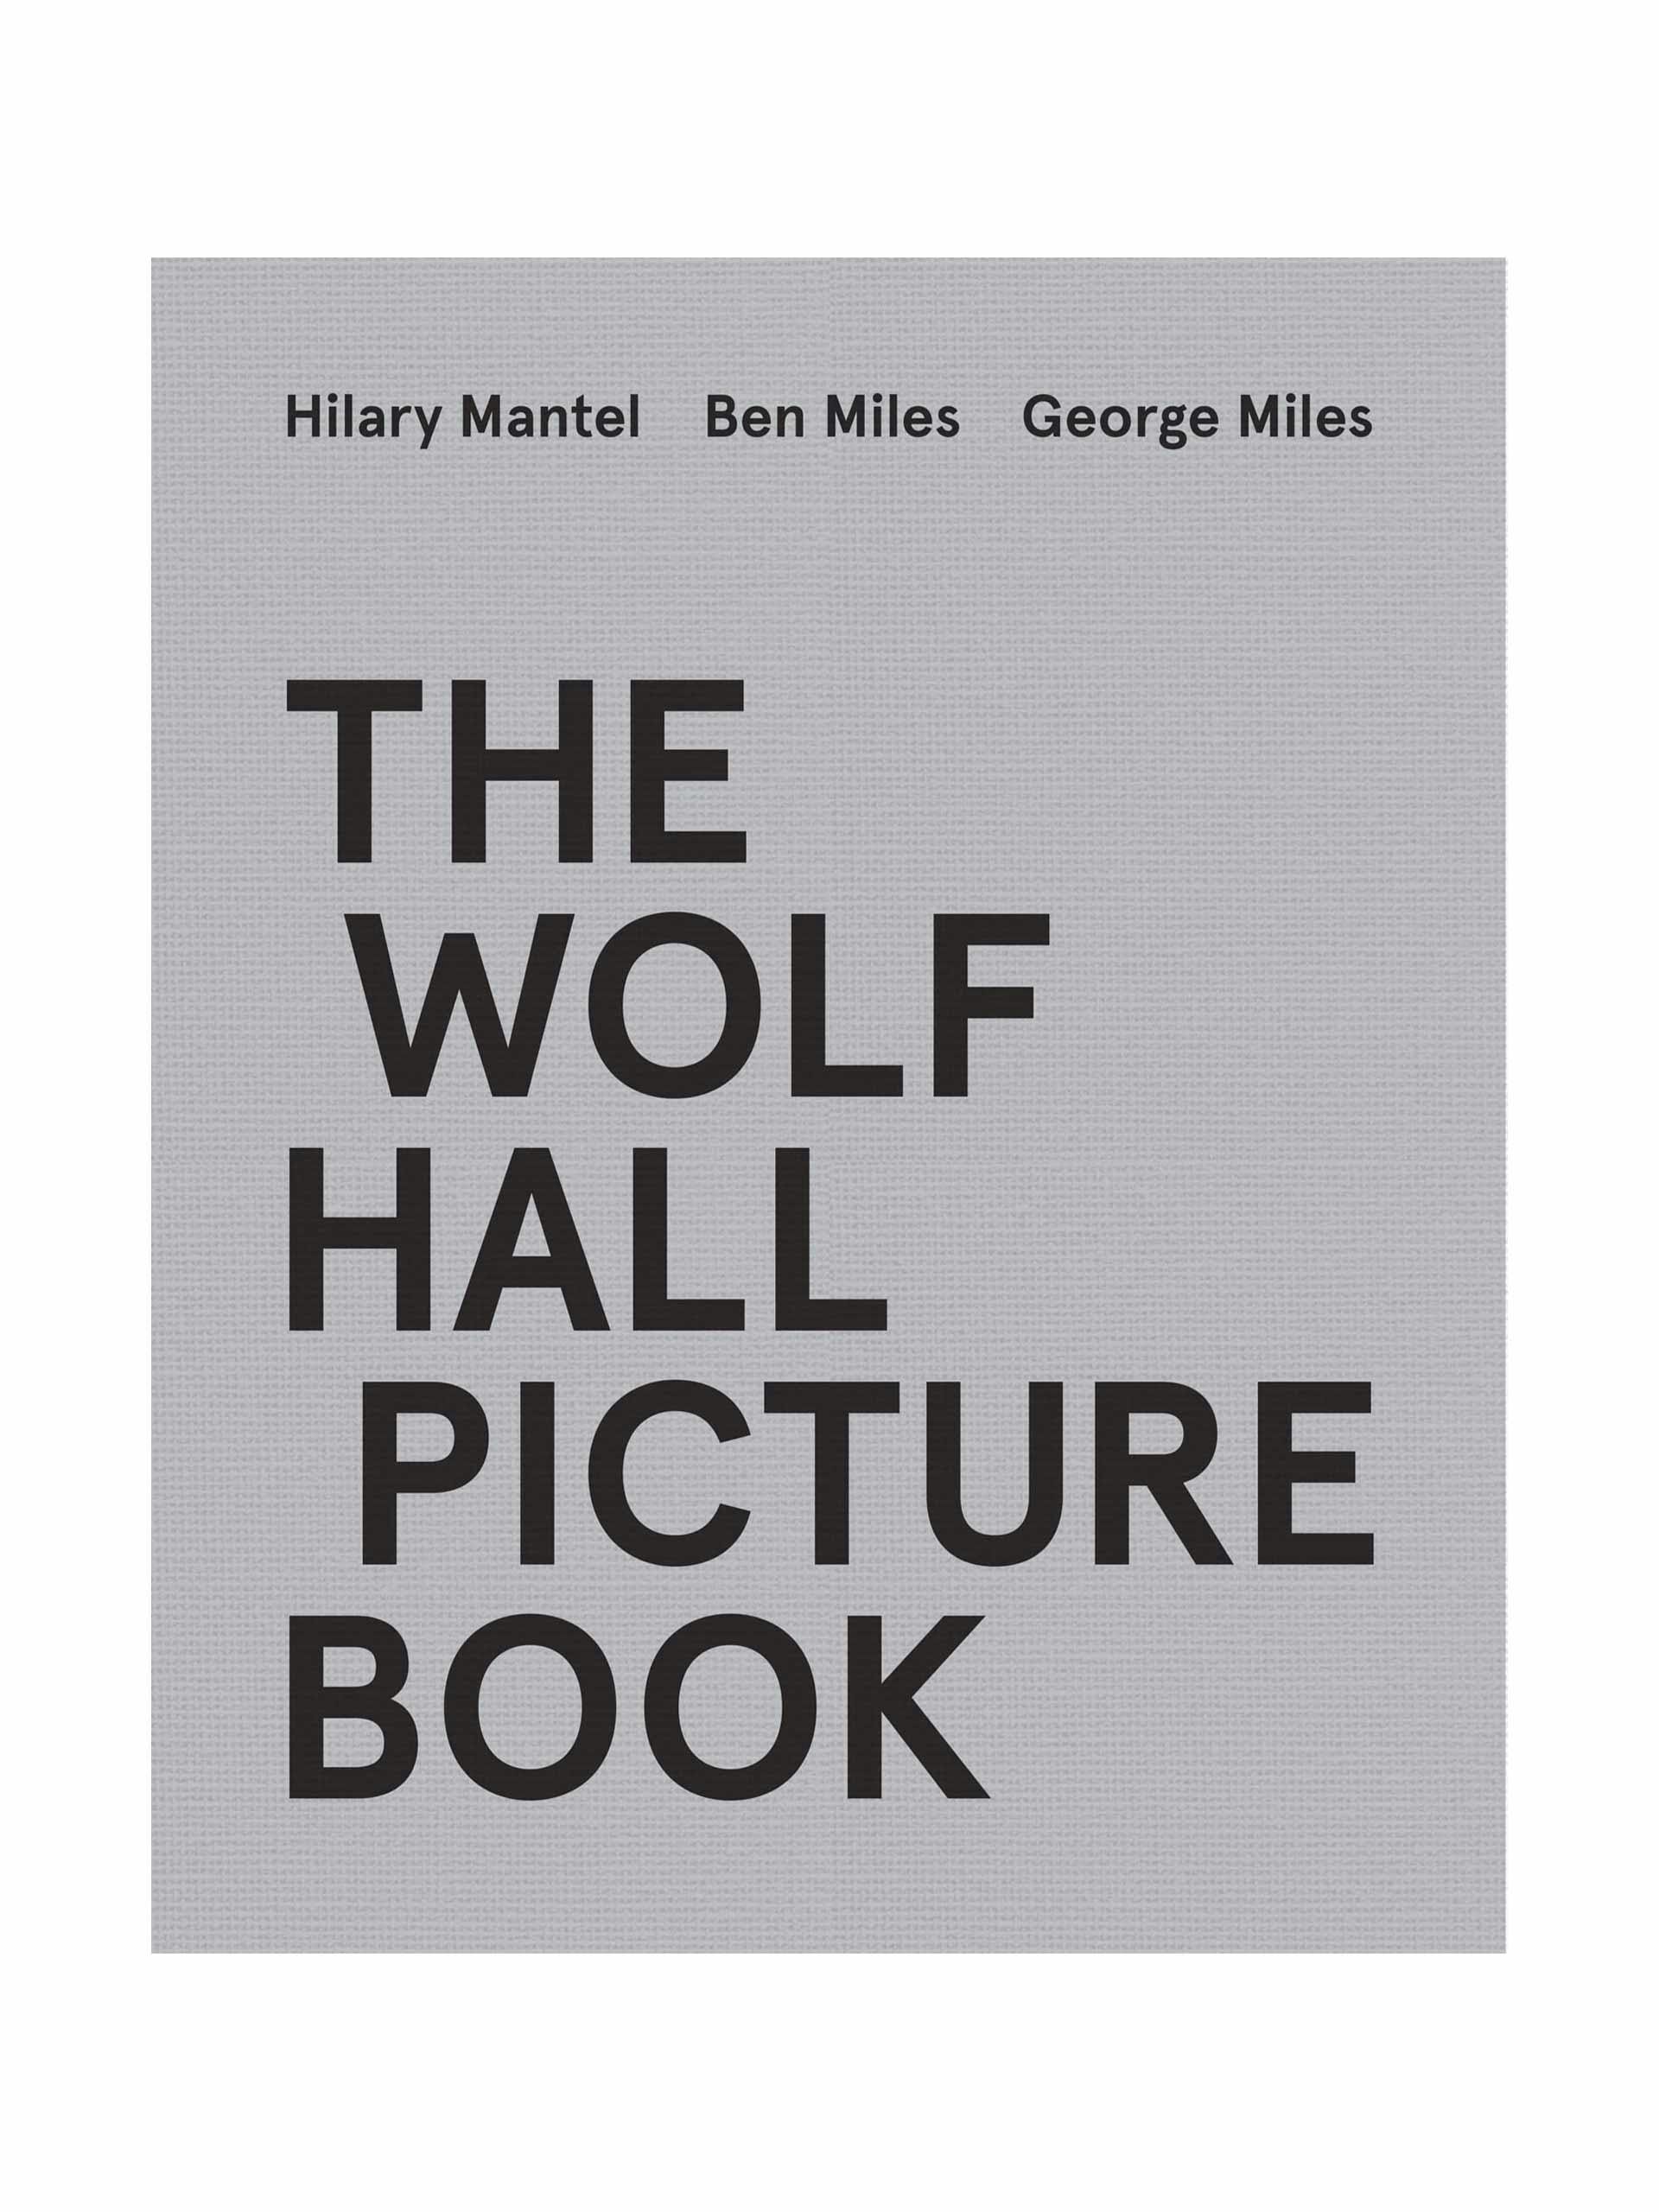 Hilary Mantel, Ben Miles and George Miles